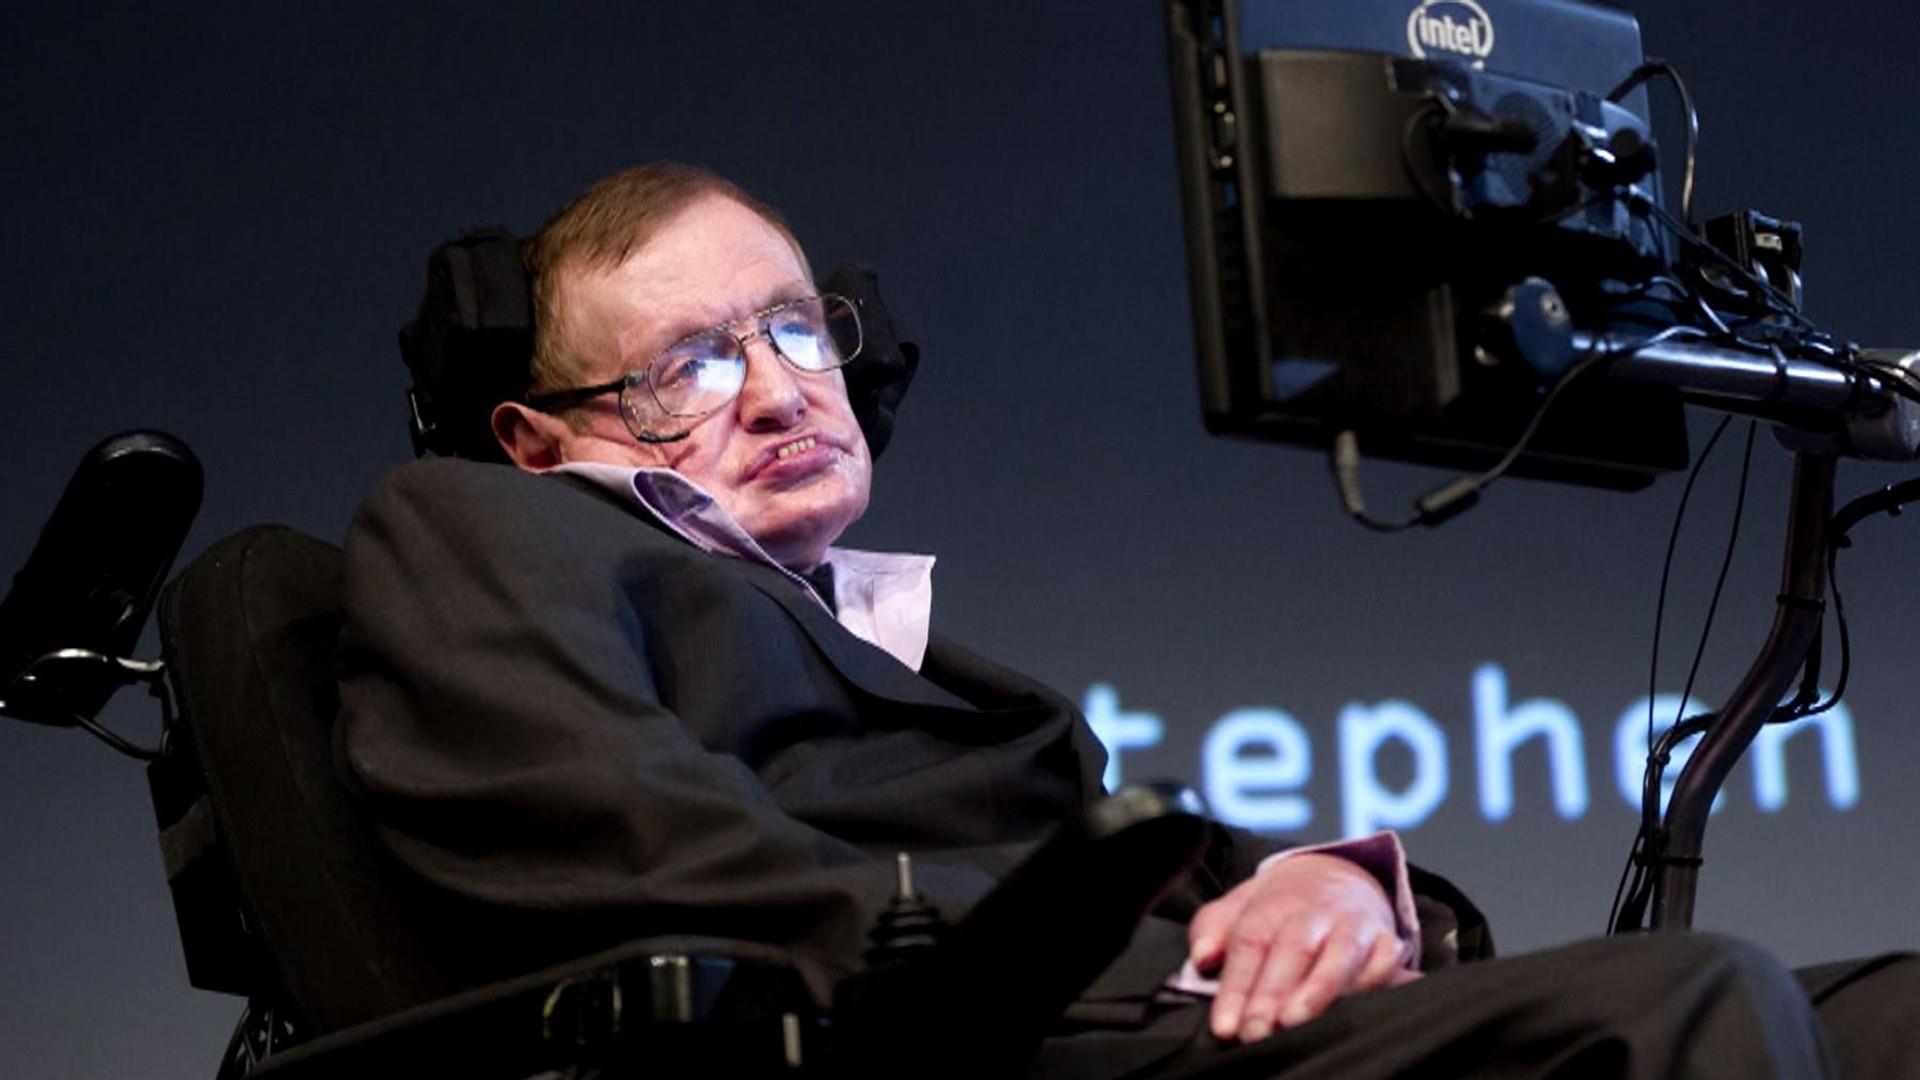 Stephen Hawking, physicist who wrote 'A Brief History of Time,' dies at 76